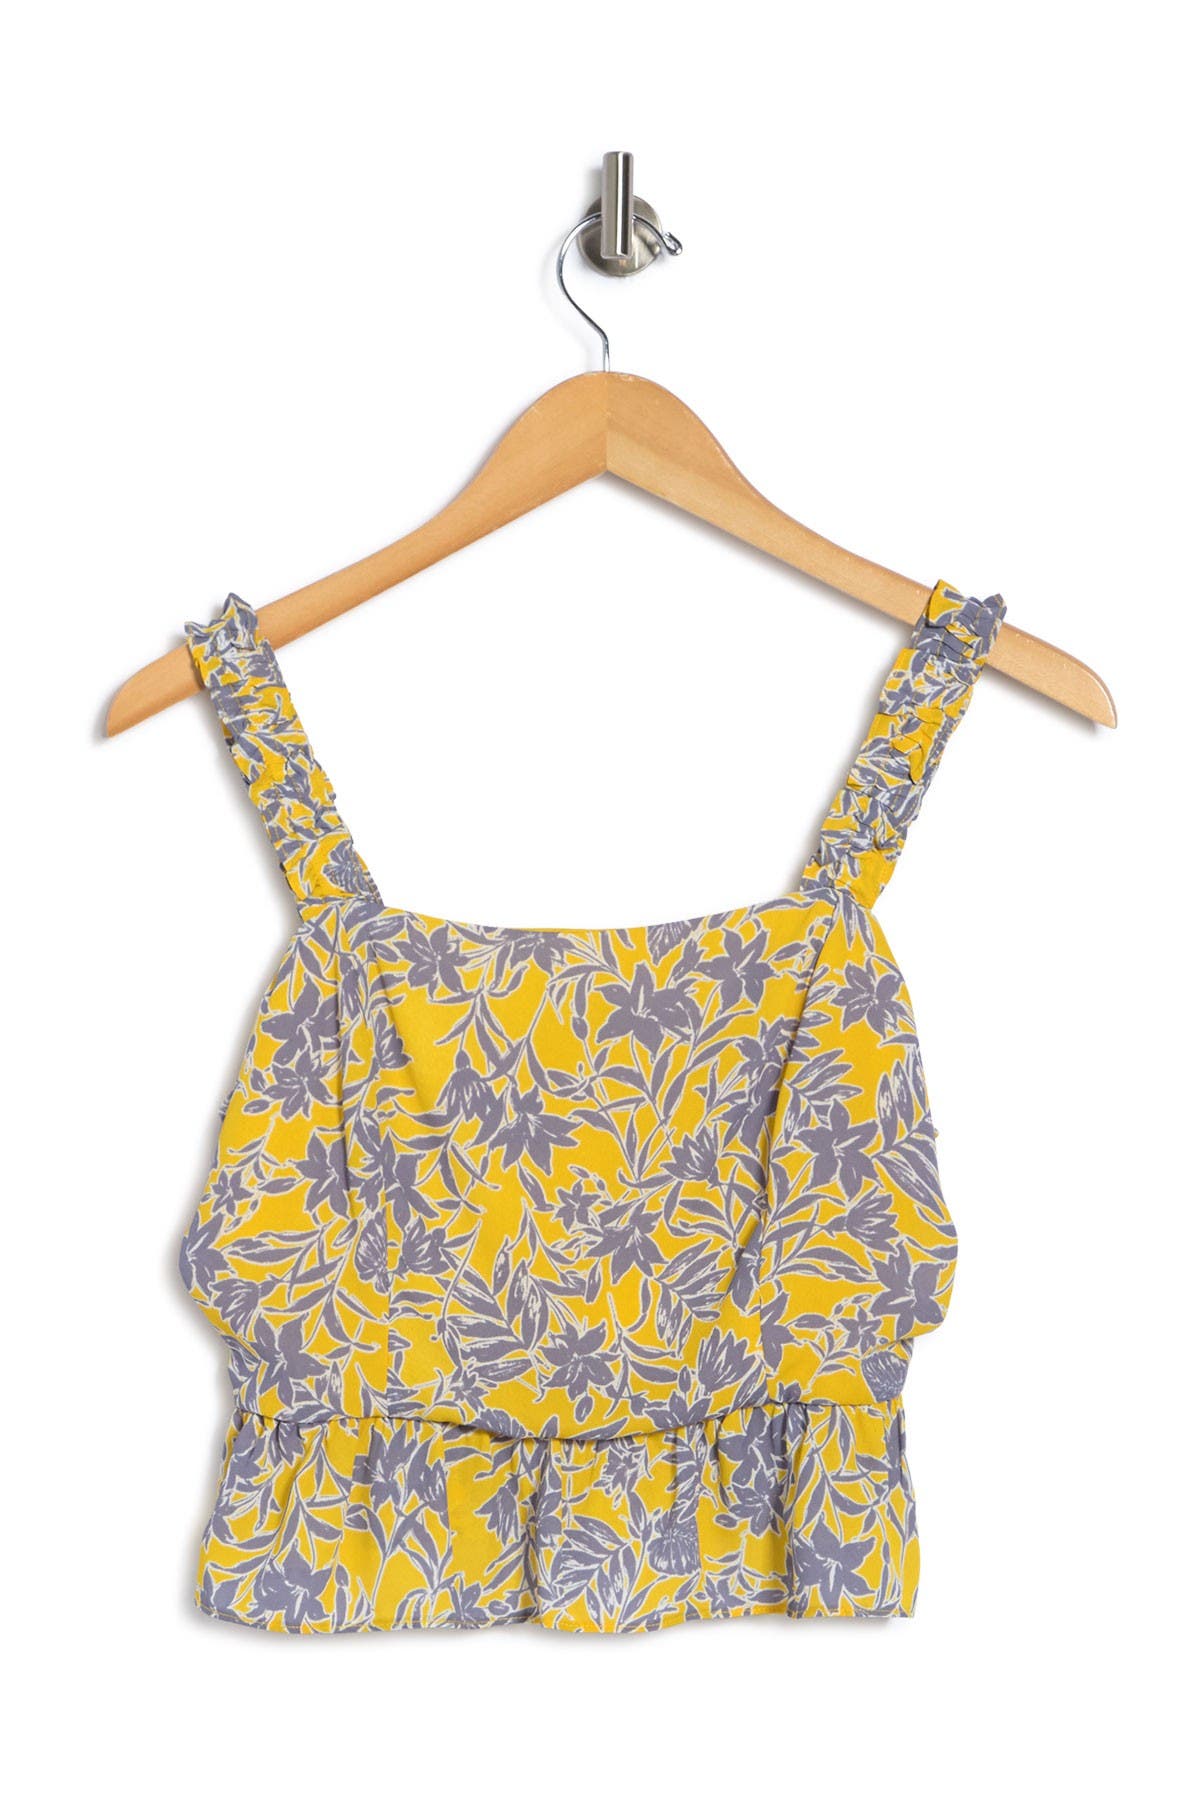 19 Cooper Woven Floral Top In Lt Blue/yellow